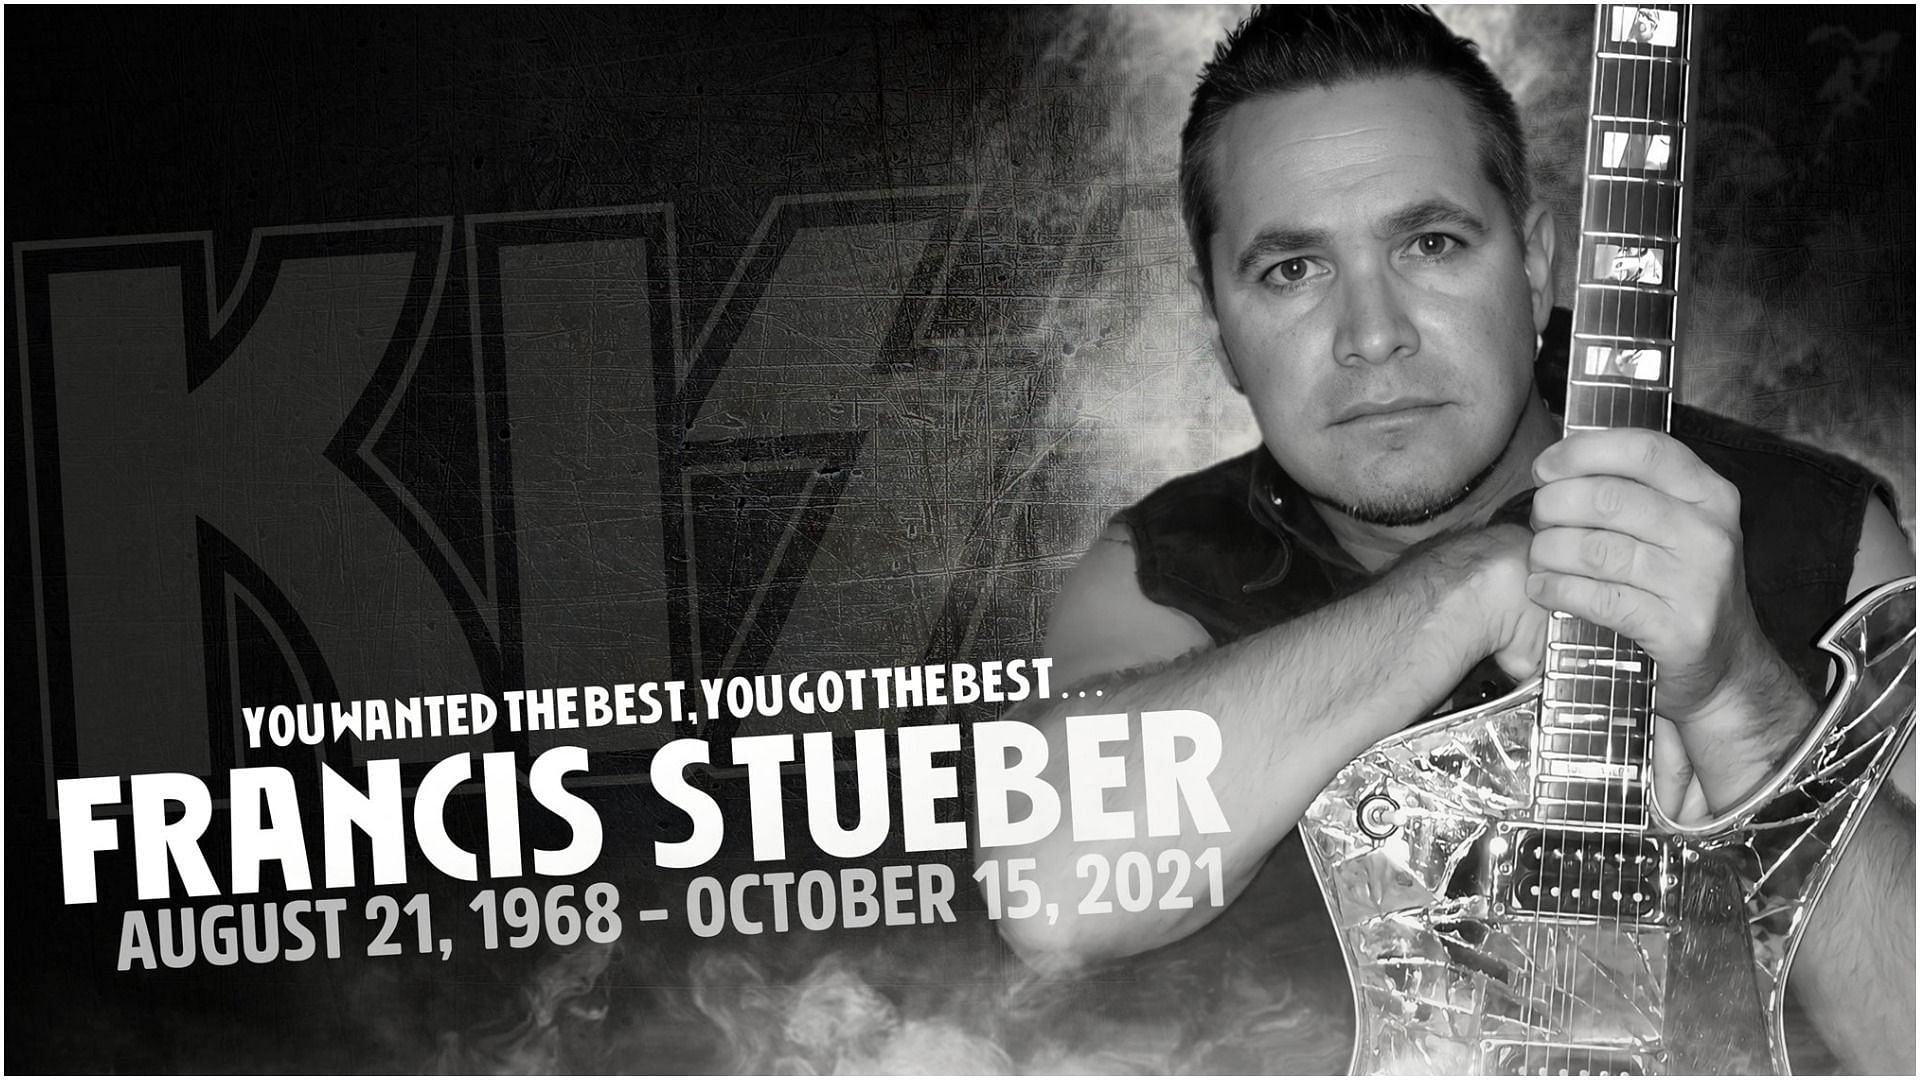 Francis Stueber recently passed away at the age of 52. (Image via Getty Images)